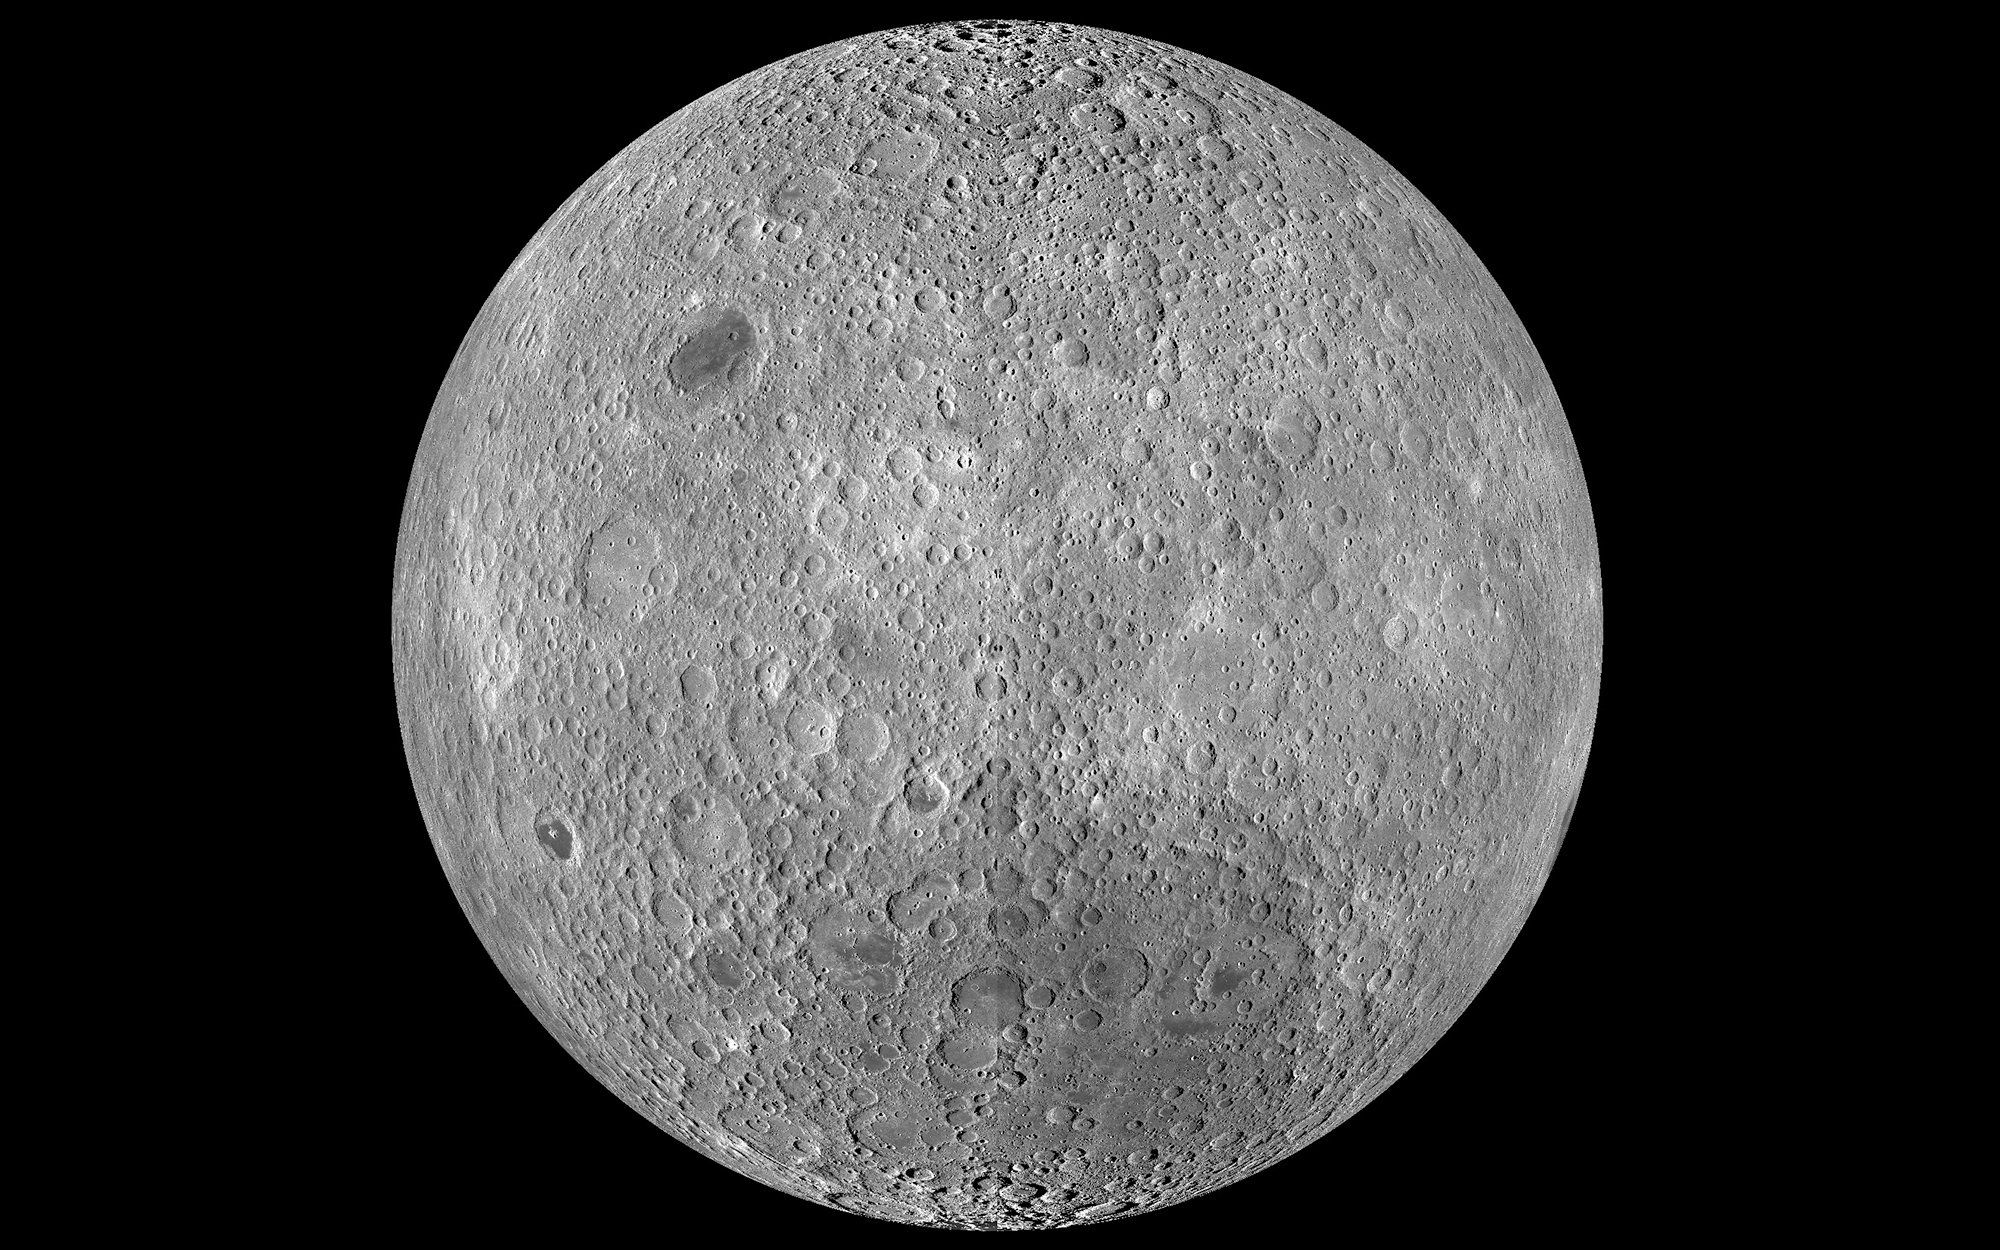 A detailed image of the cratered far side of the moon.